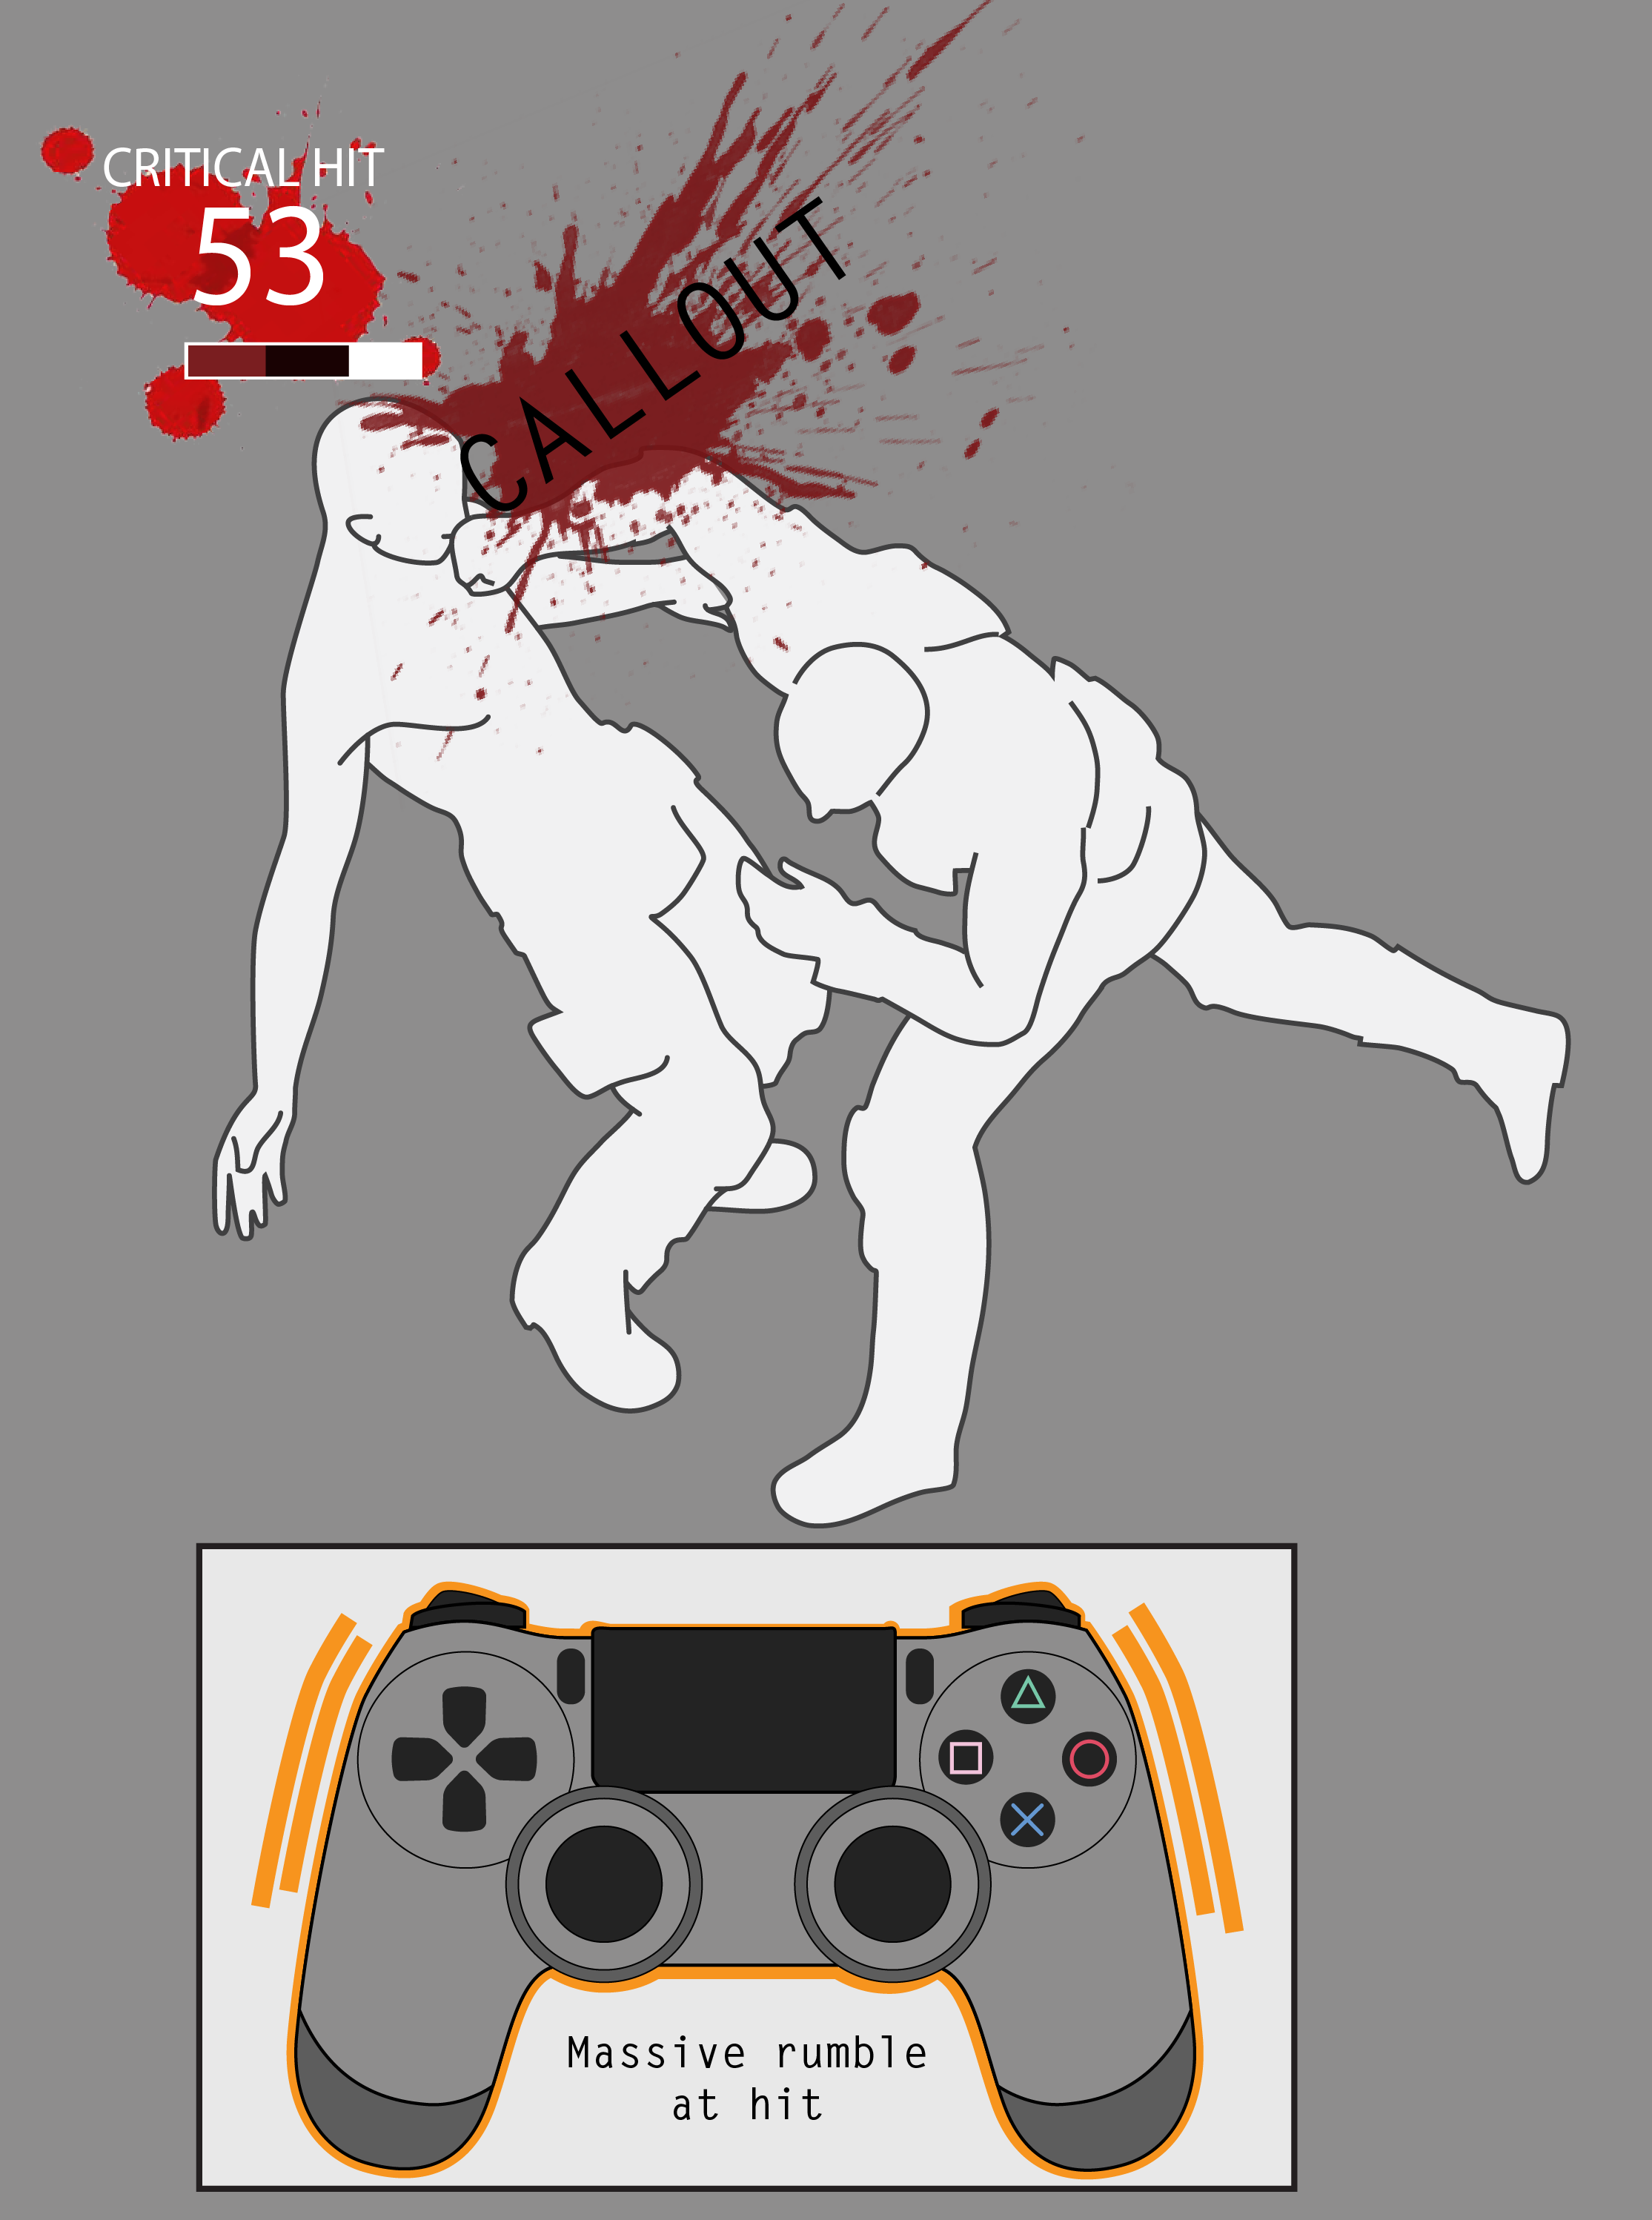 A wireframe outline of a character hitting another character. Blood spatter and rumble in the controller are called out in the image.